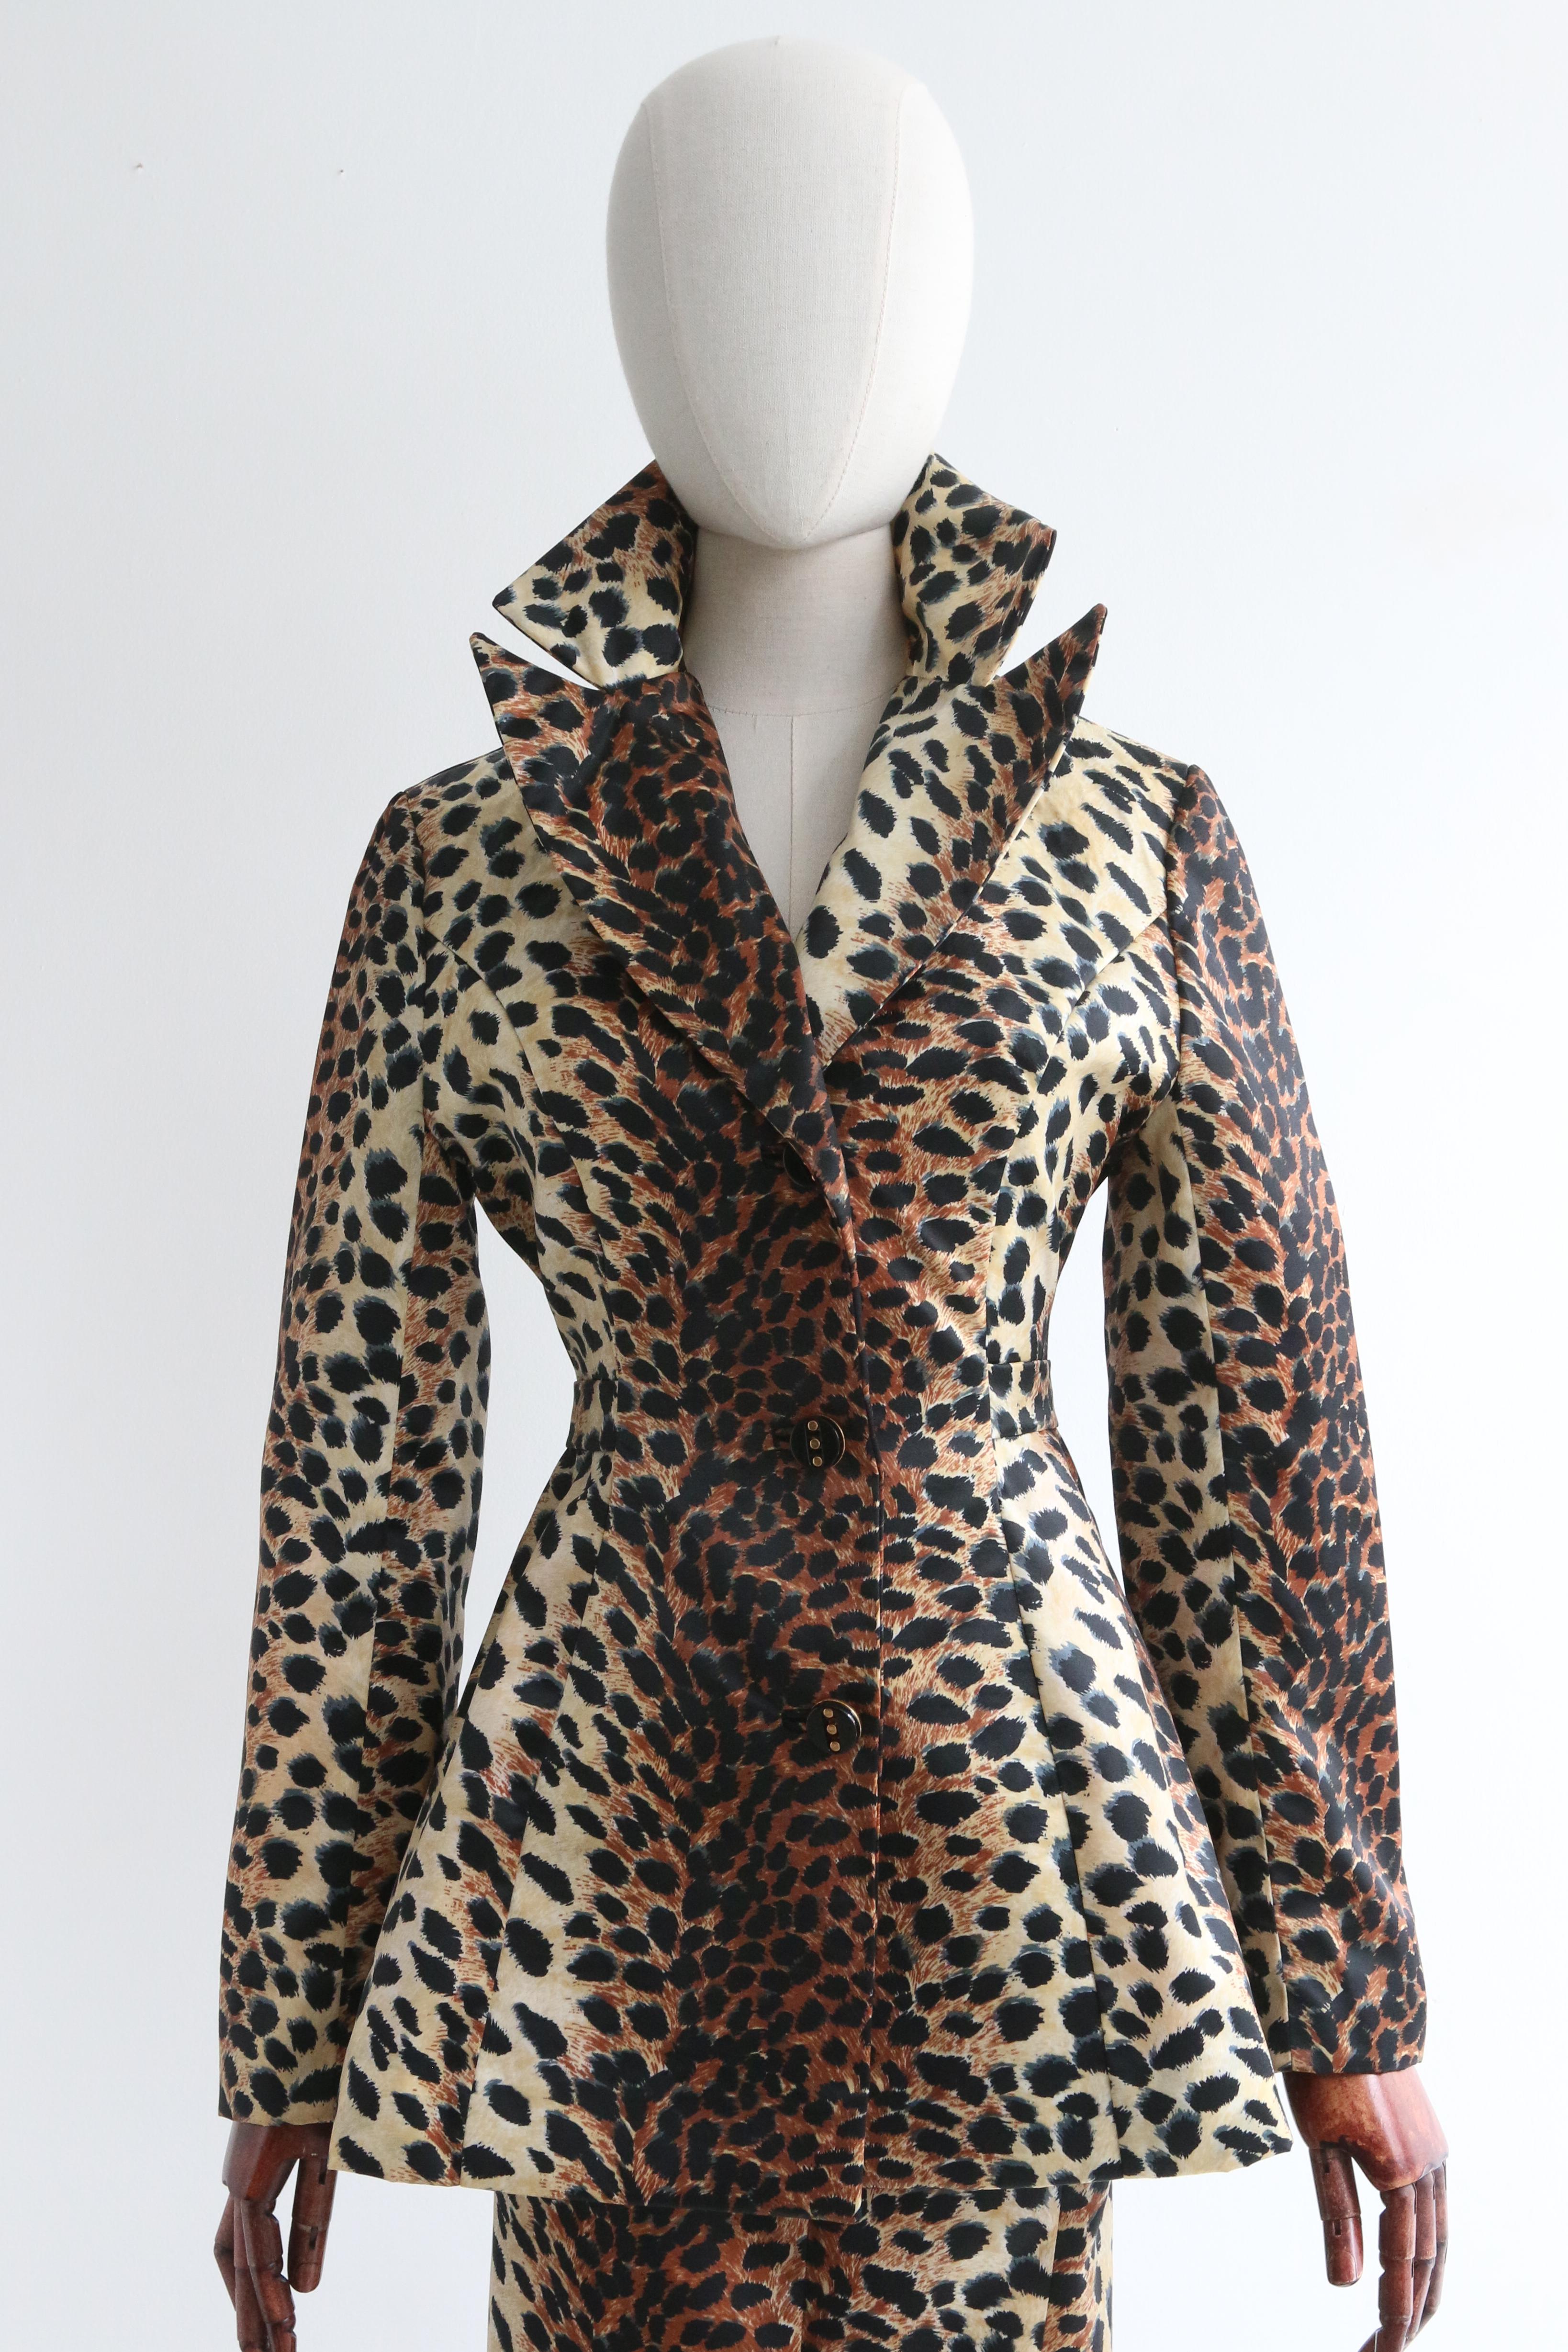 Rendered in a classic silhouette, this original late 1960's leopard print Lilli Ann skirt suit, is an iconic set for your statement wardrobe. 

The V shaped neckline of the jacket is framed by a wide notched collar and a simple shoulder line. The